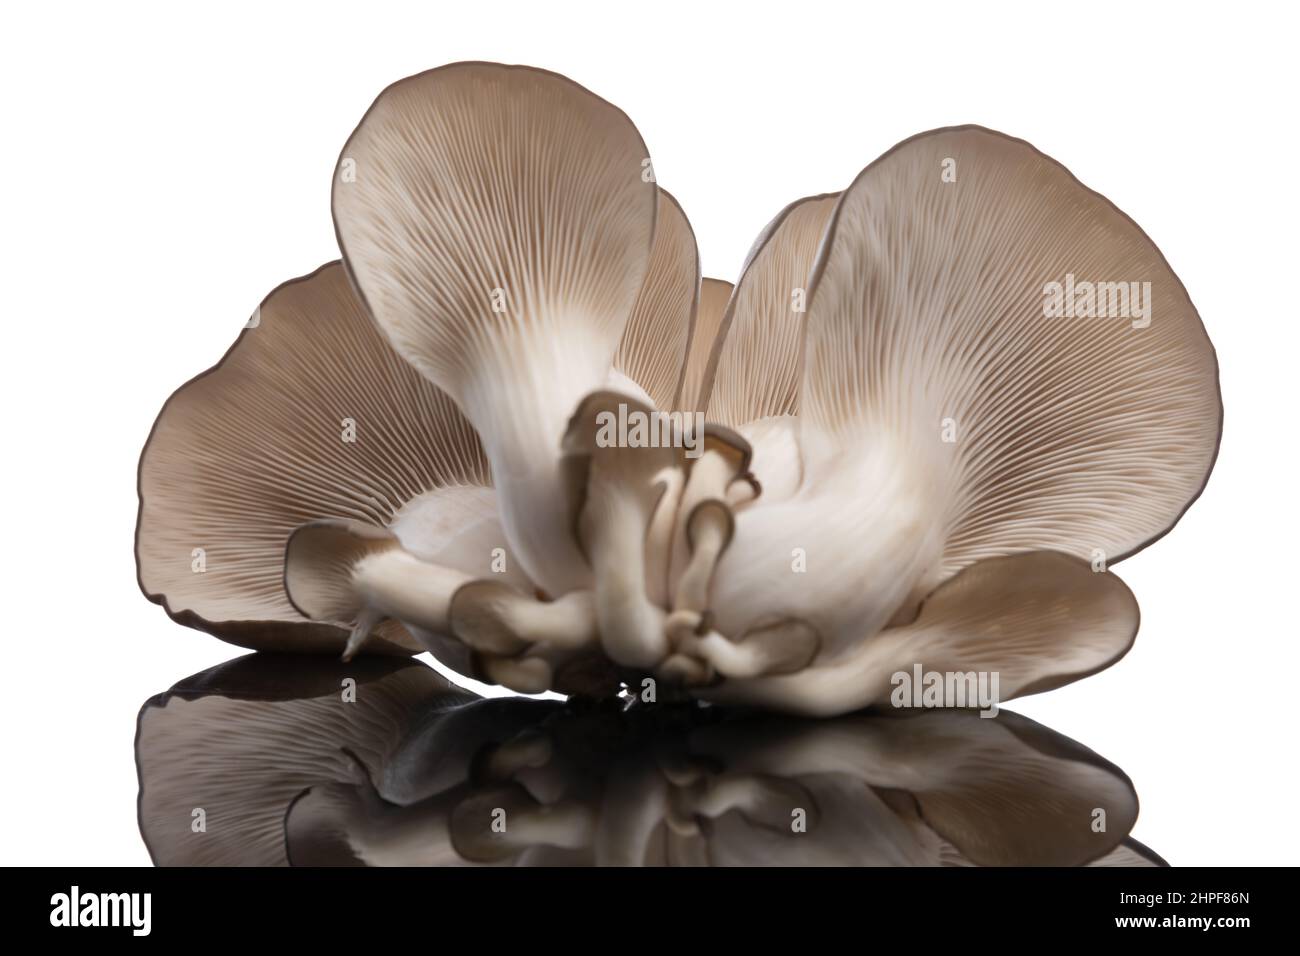 oyster fungus on white background promoting healthy lifestyle and getting ready to be cooked for a delicious dinner Stock Photo